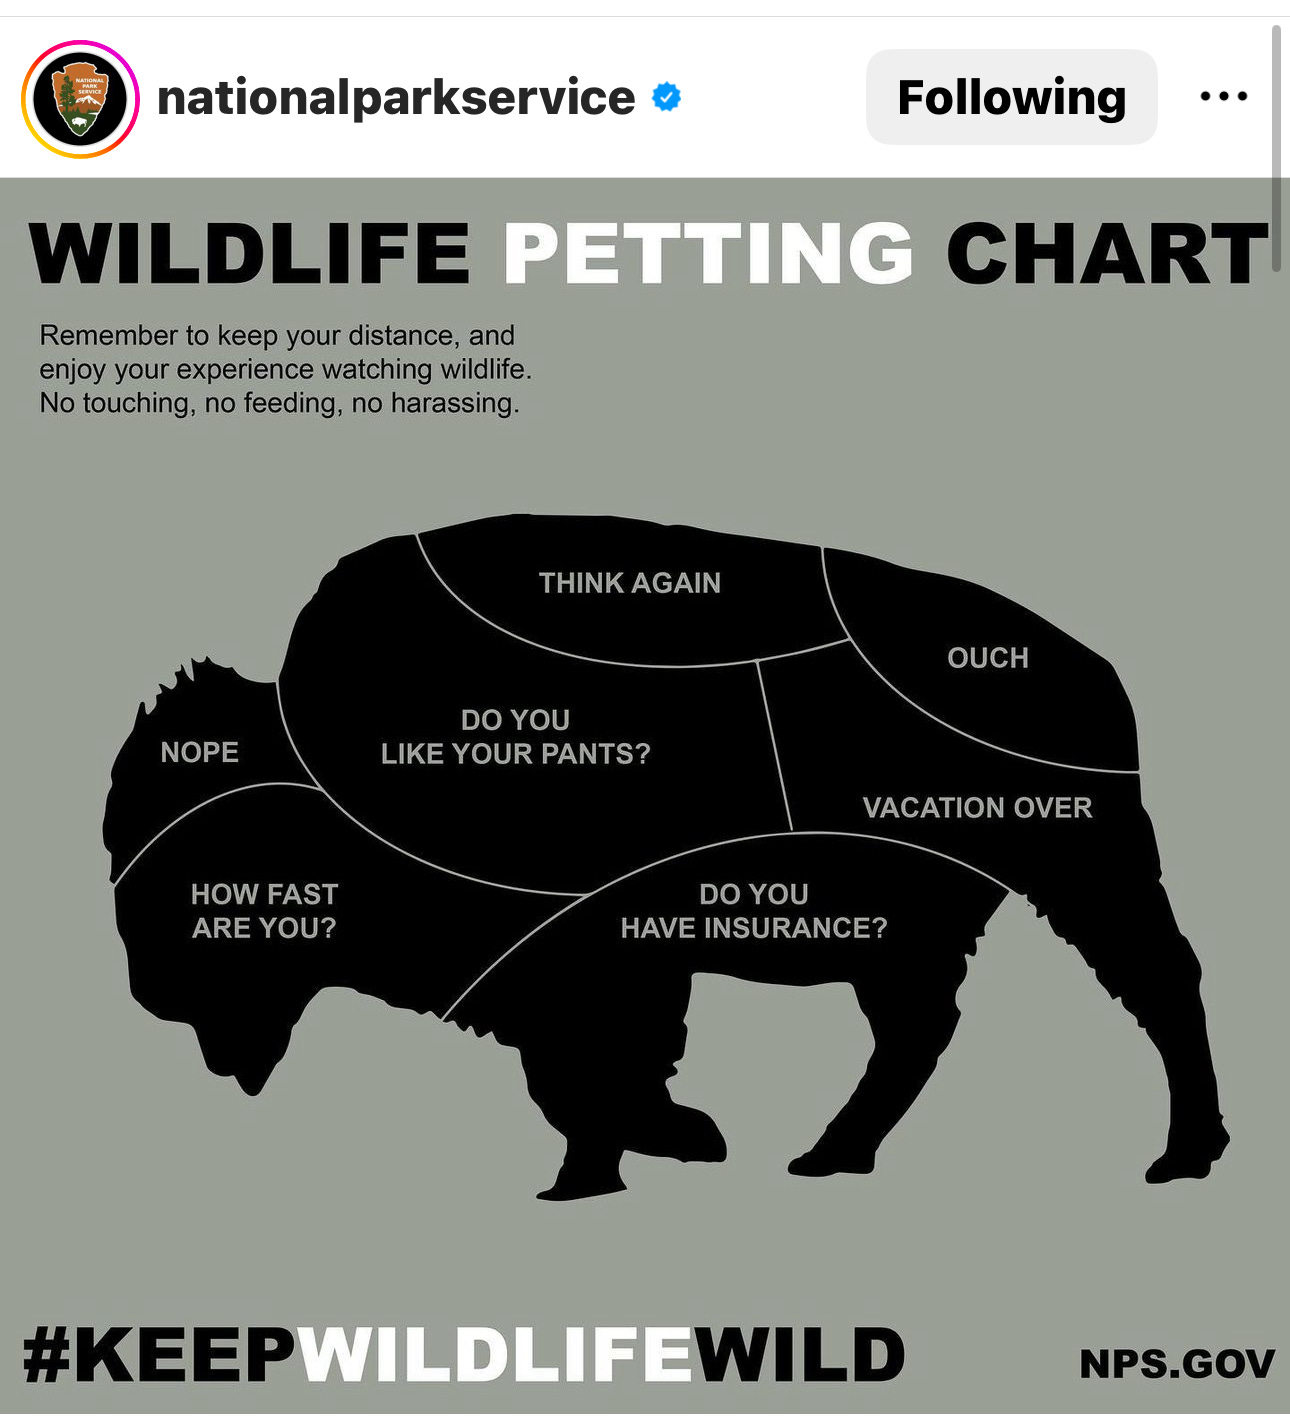 A "Wildlife Petting Chart" featuring a bison, with various areas saying things like nope, think again, ouch, and do you like your pants, and do you have insurance?